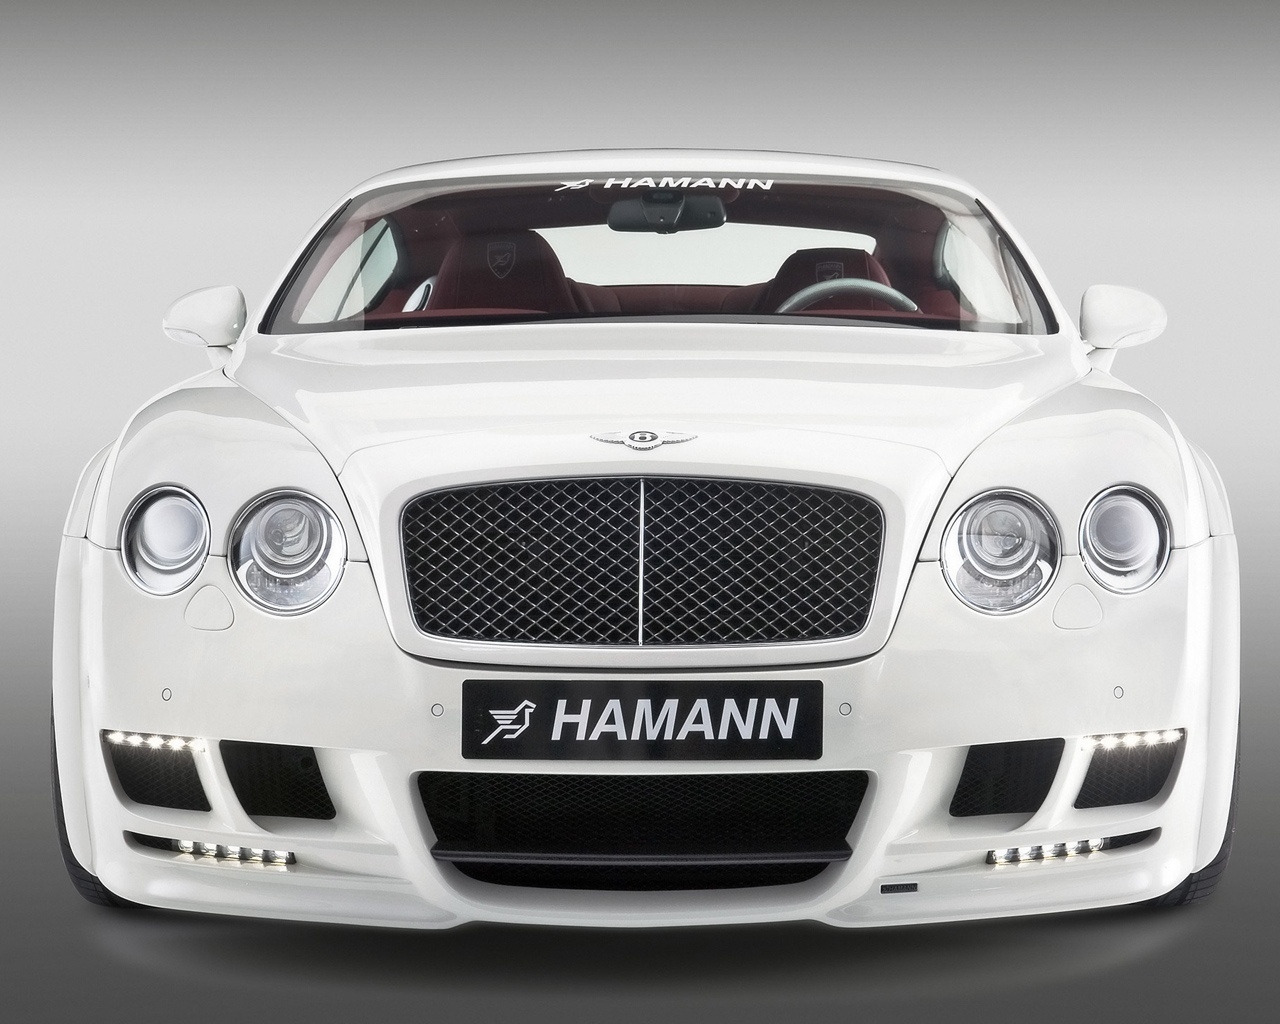 Bentley Continental GT Hamann Imperator 2009 for 1280 x 1024 resolution